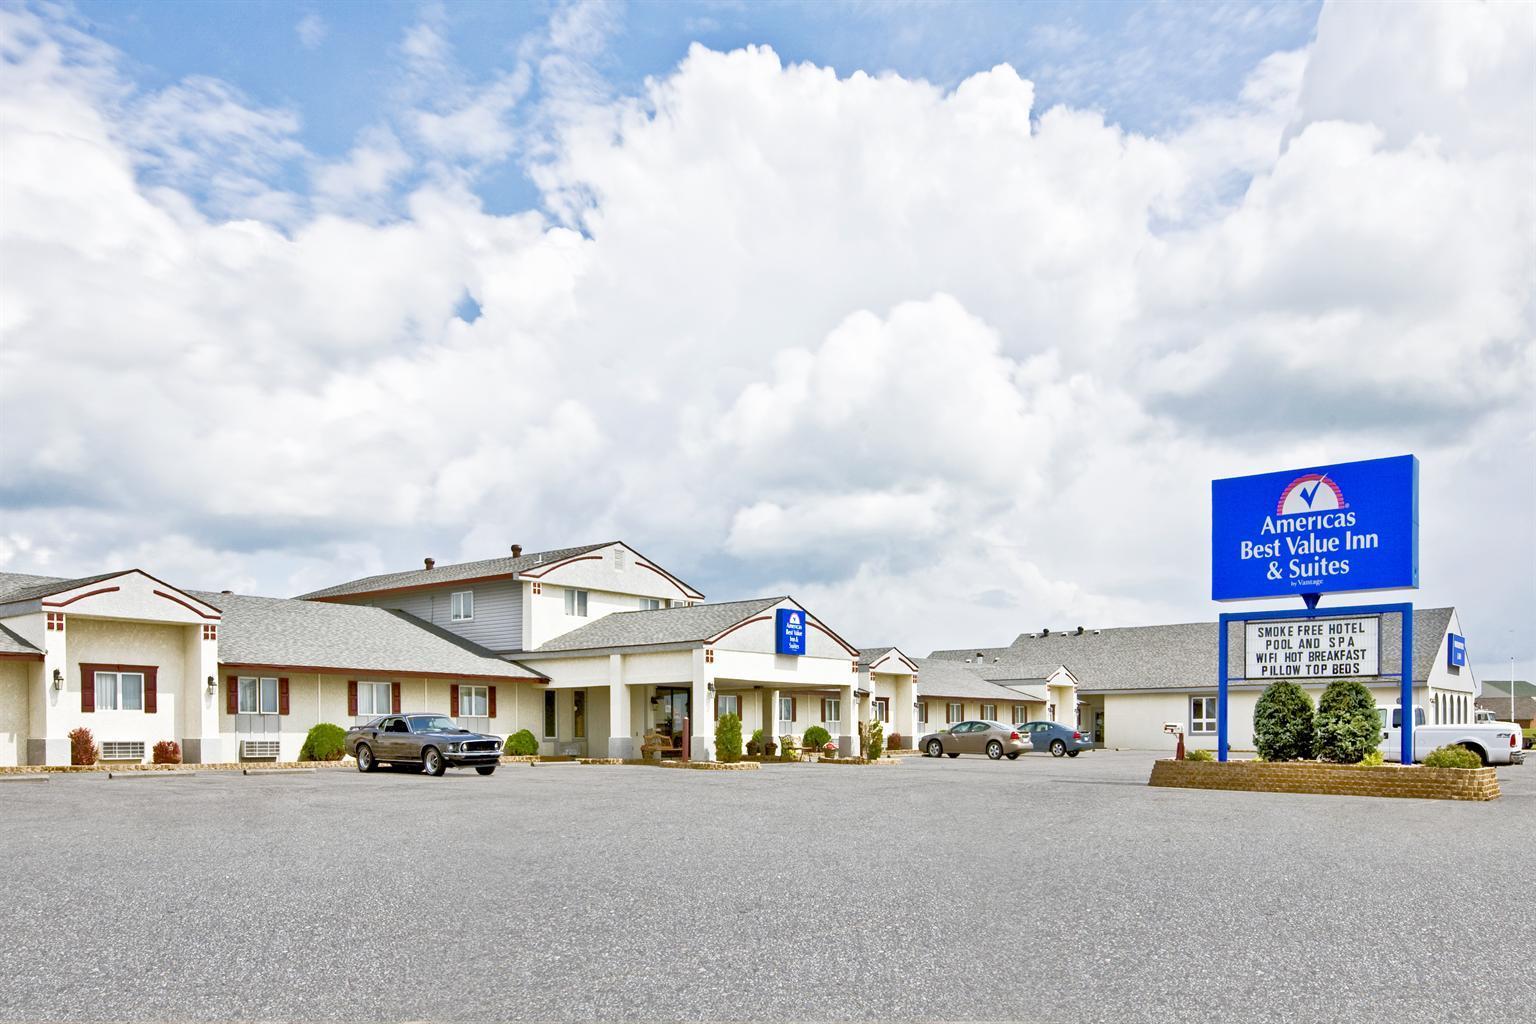 Hotel exterior with parking lot and sign